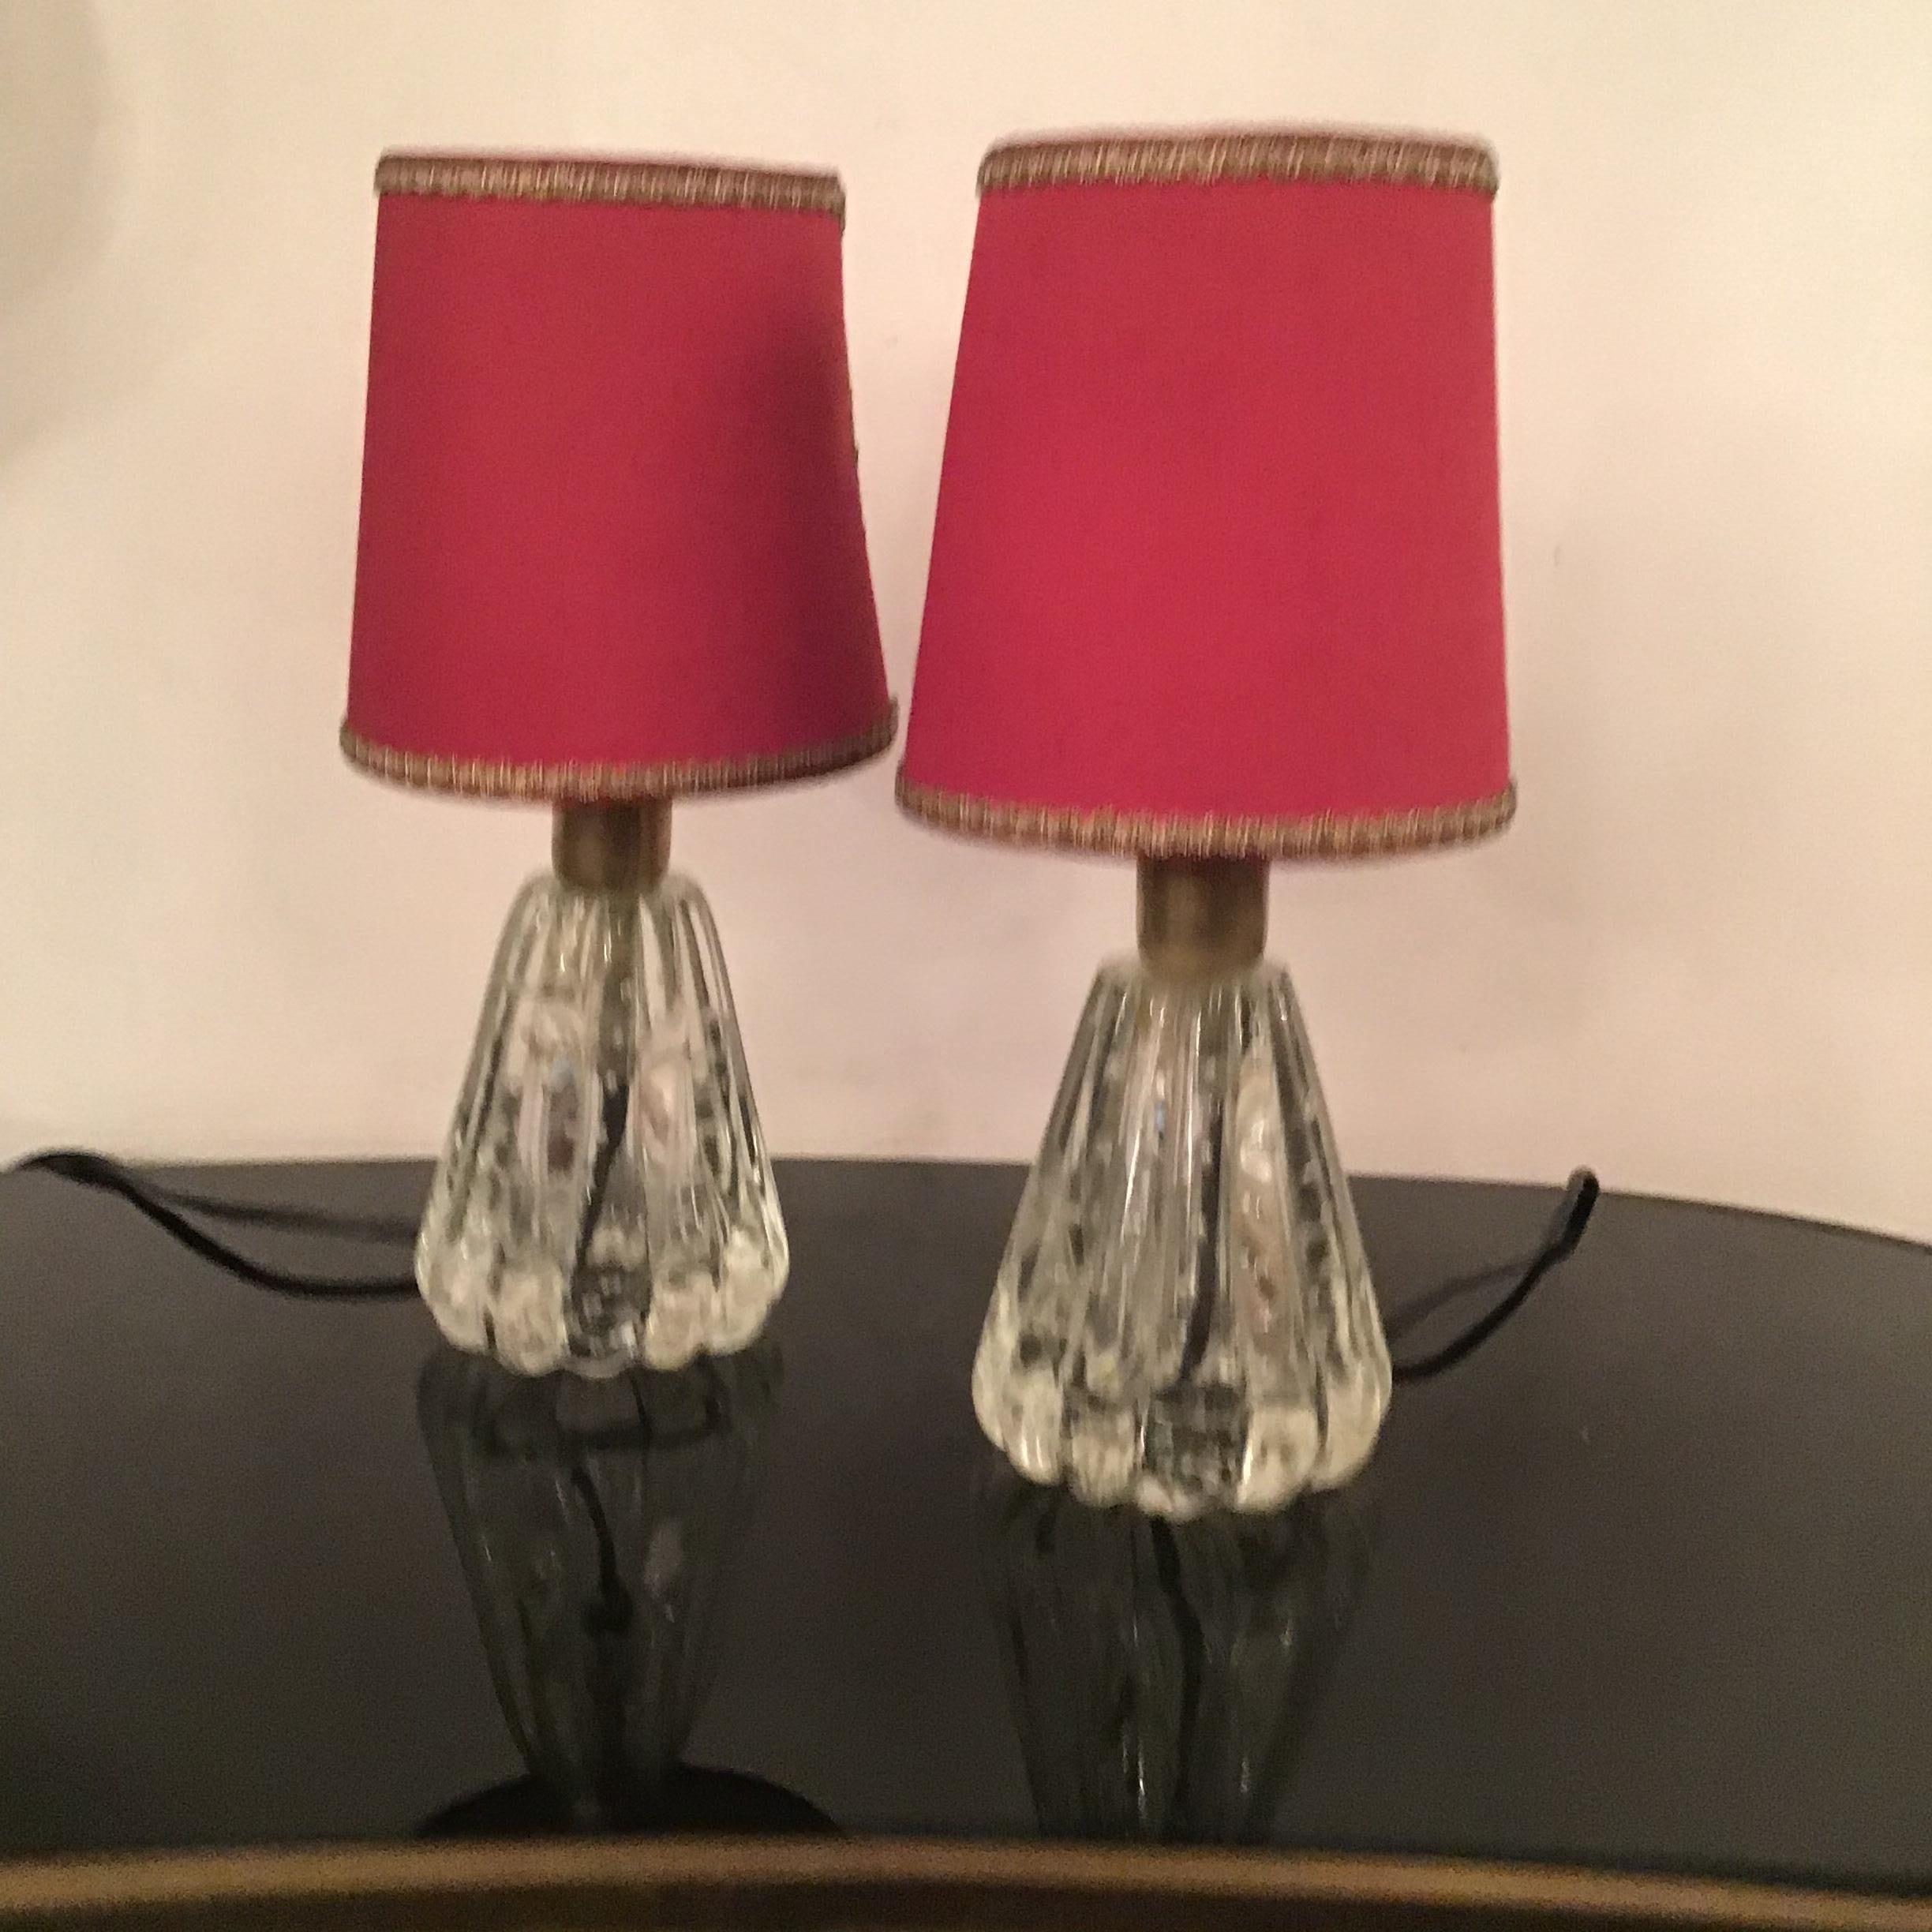 Barovier e Toso Table Lamps Murano Glass Brass Fabric Lampshade 1940 Italy For Sale 8